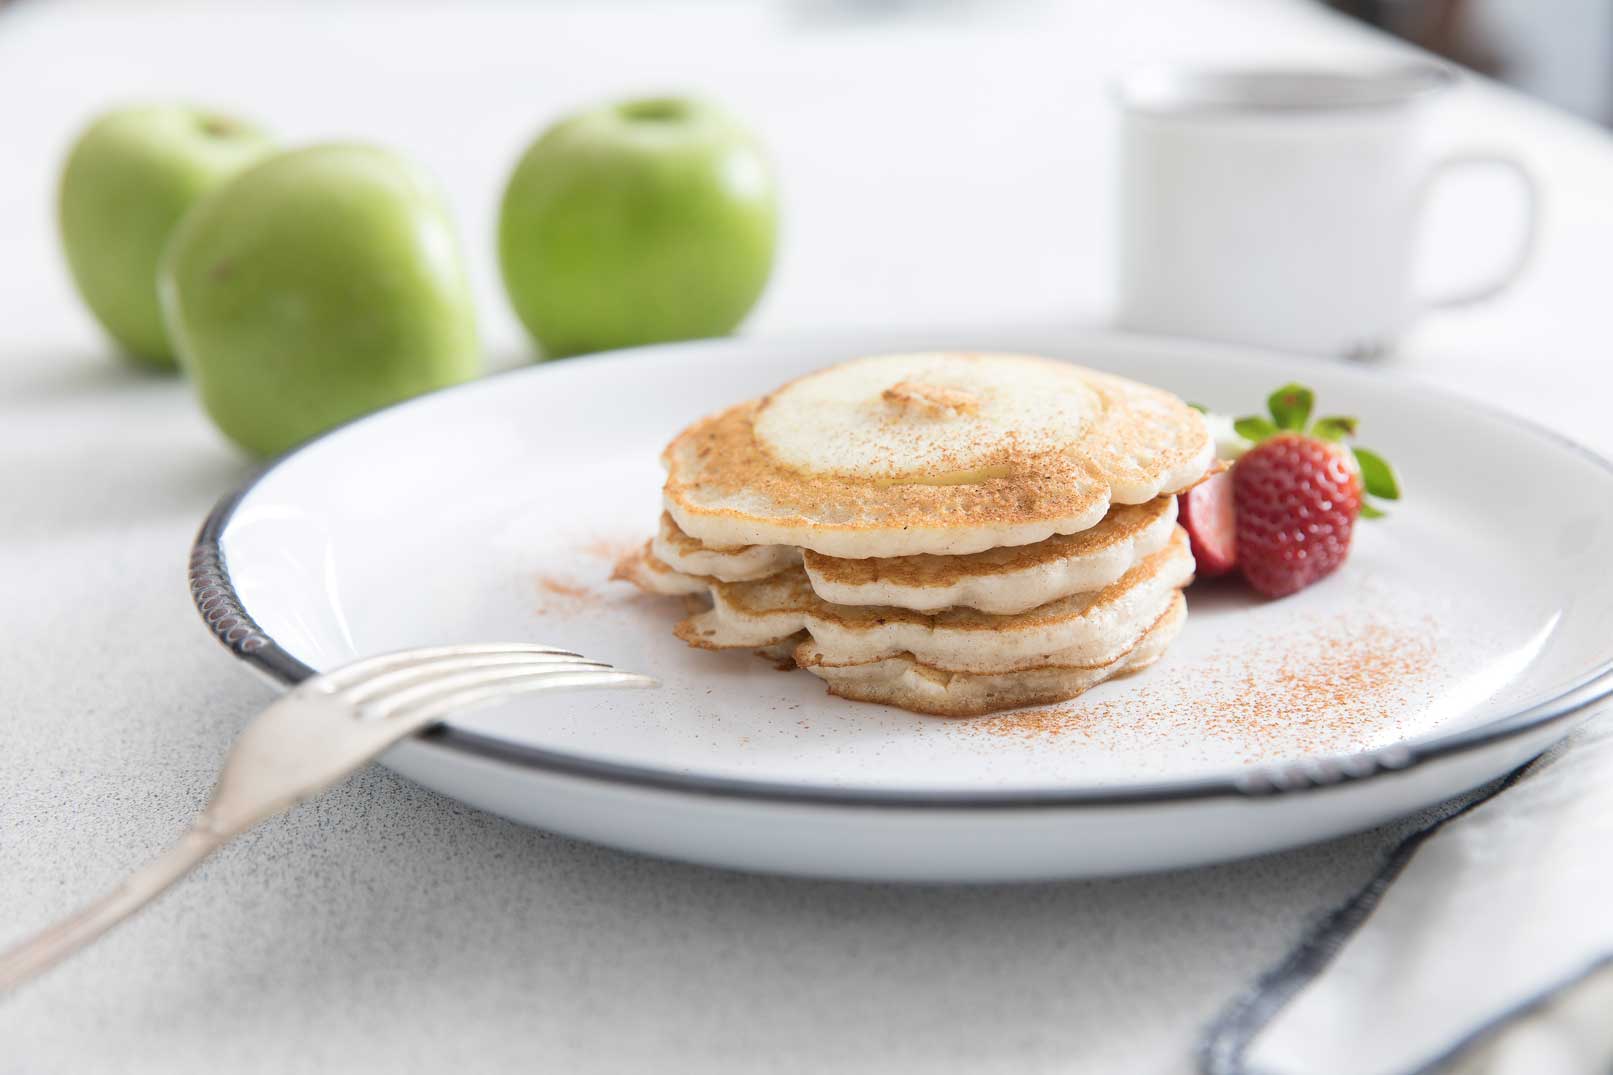 Stacked apple ring pancakes sprinkled with cinnamon on a large white plate with a strawberry and fork on the side for serving.